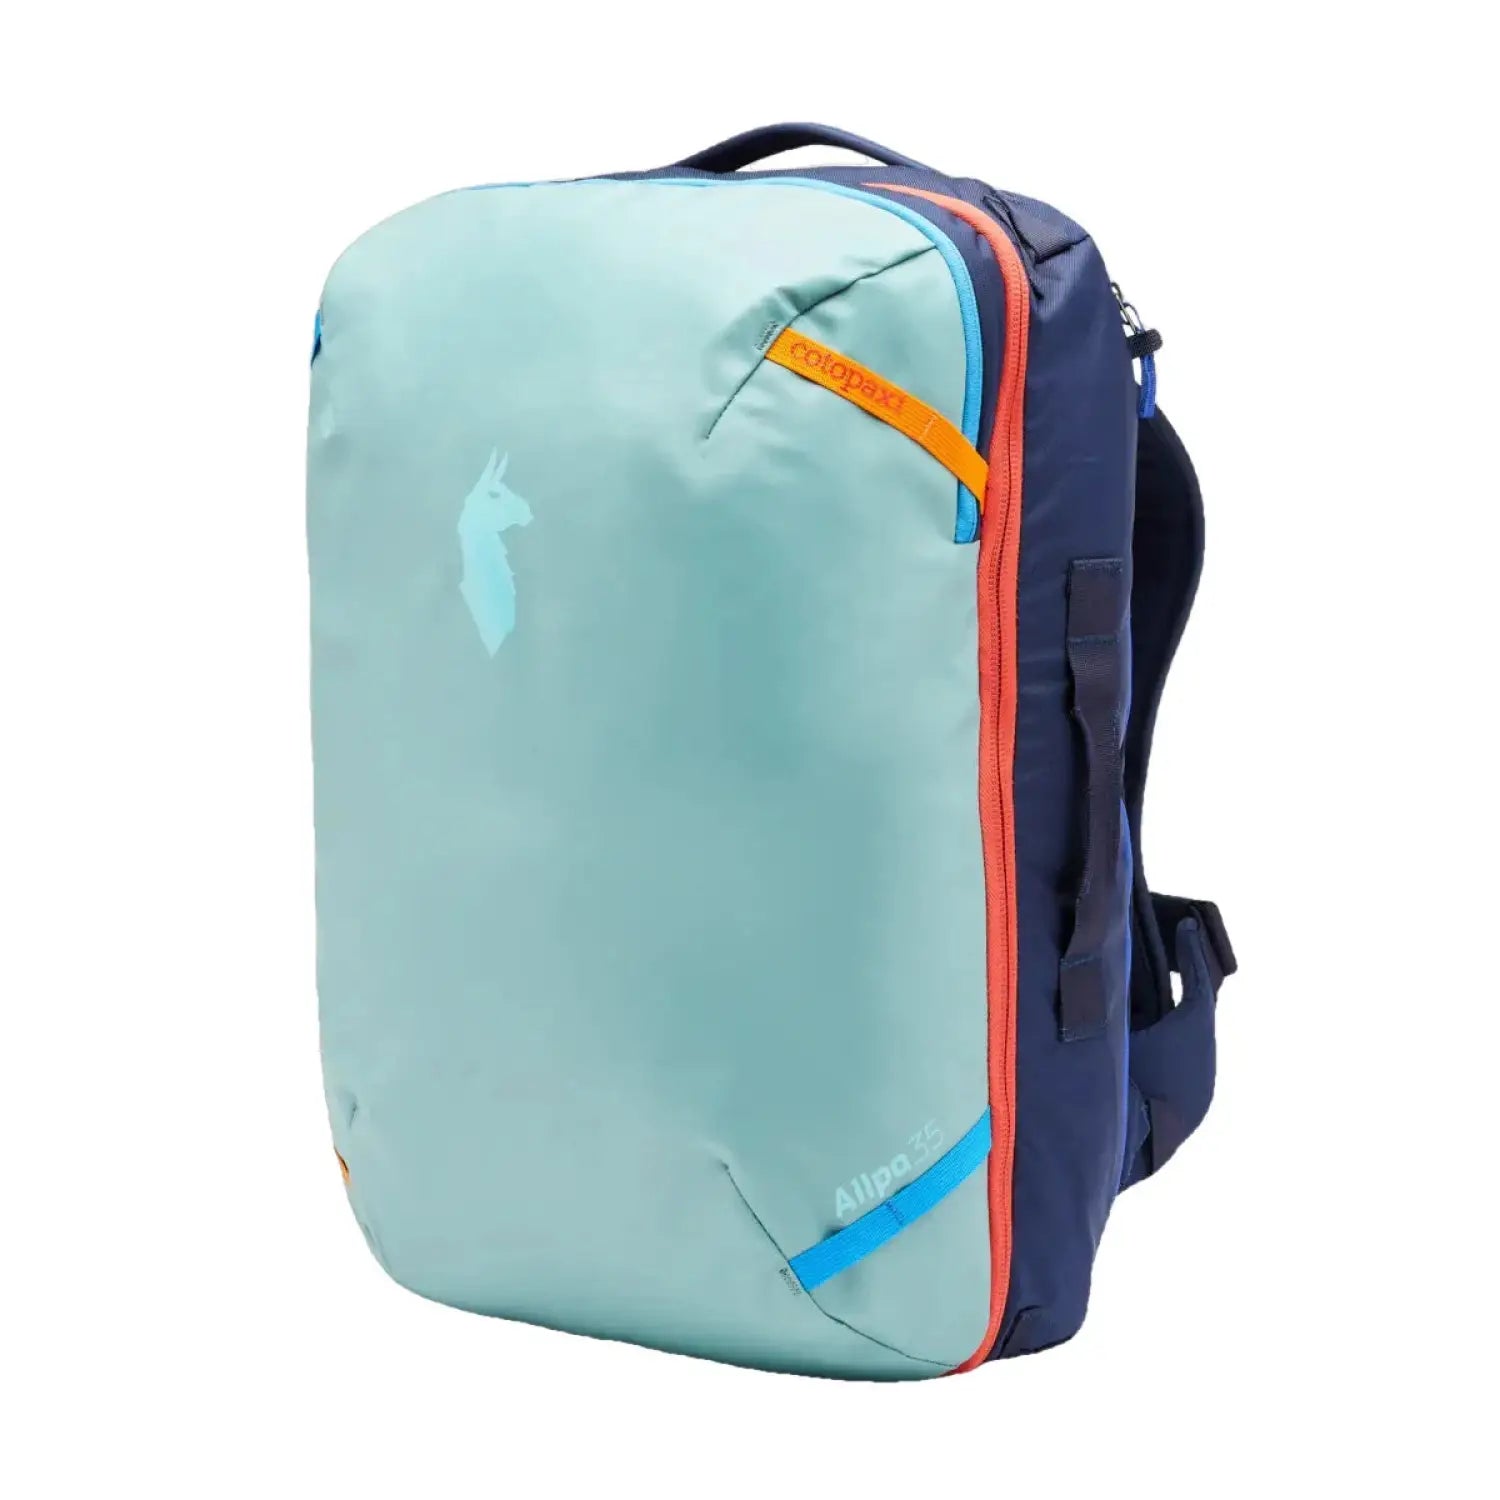 Cotopaxi Allpa 35L Travel Pack shown in Bluegrass. Front view.